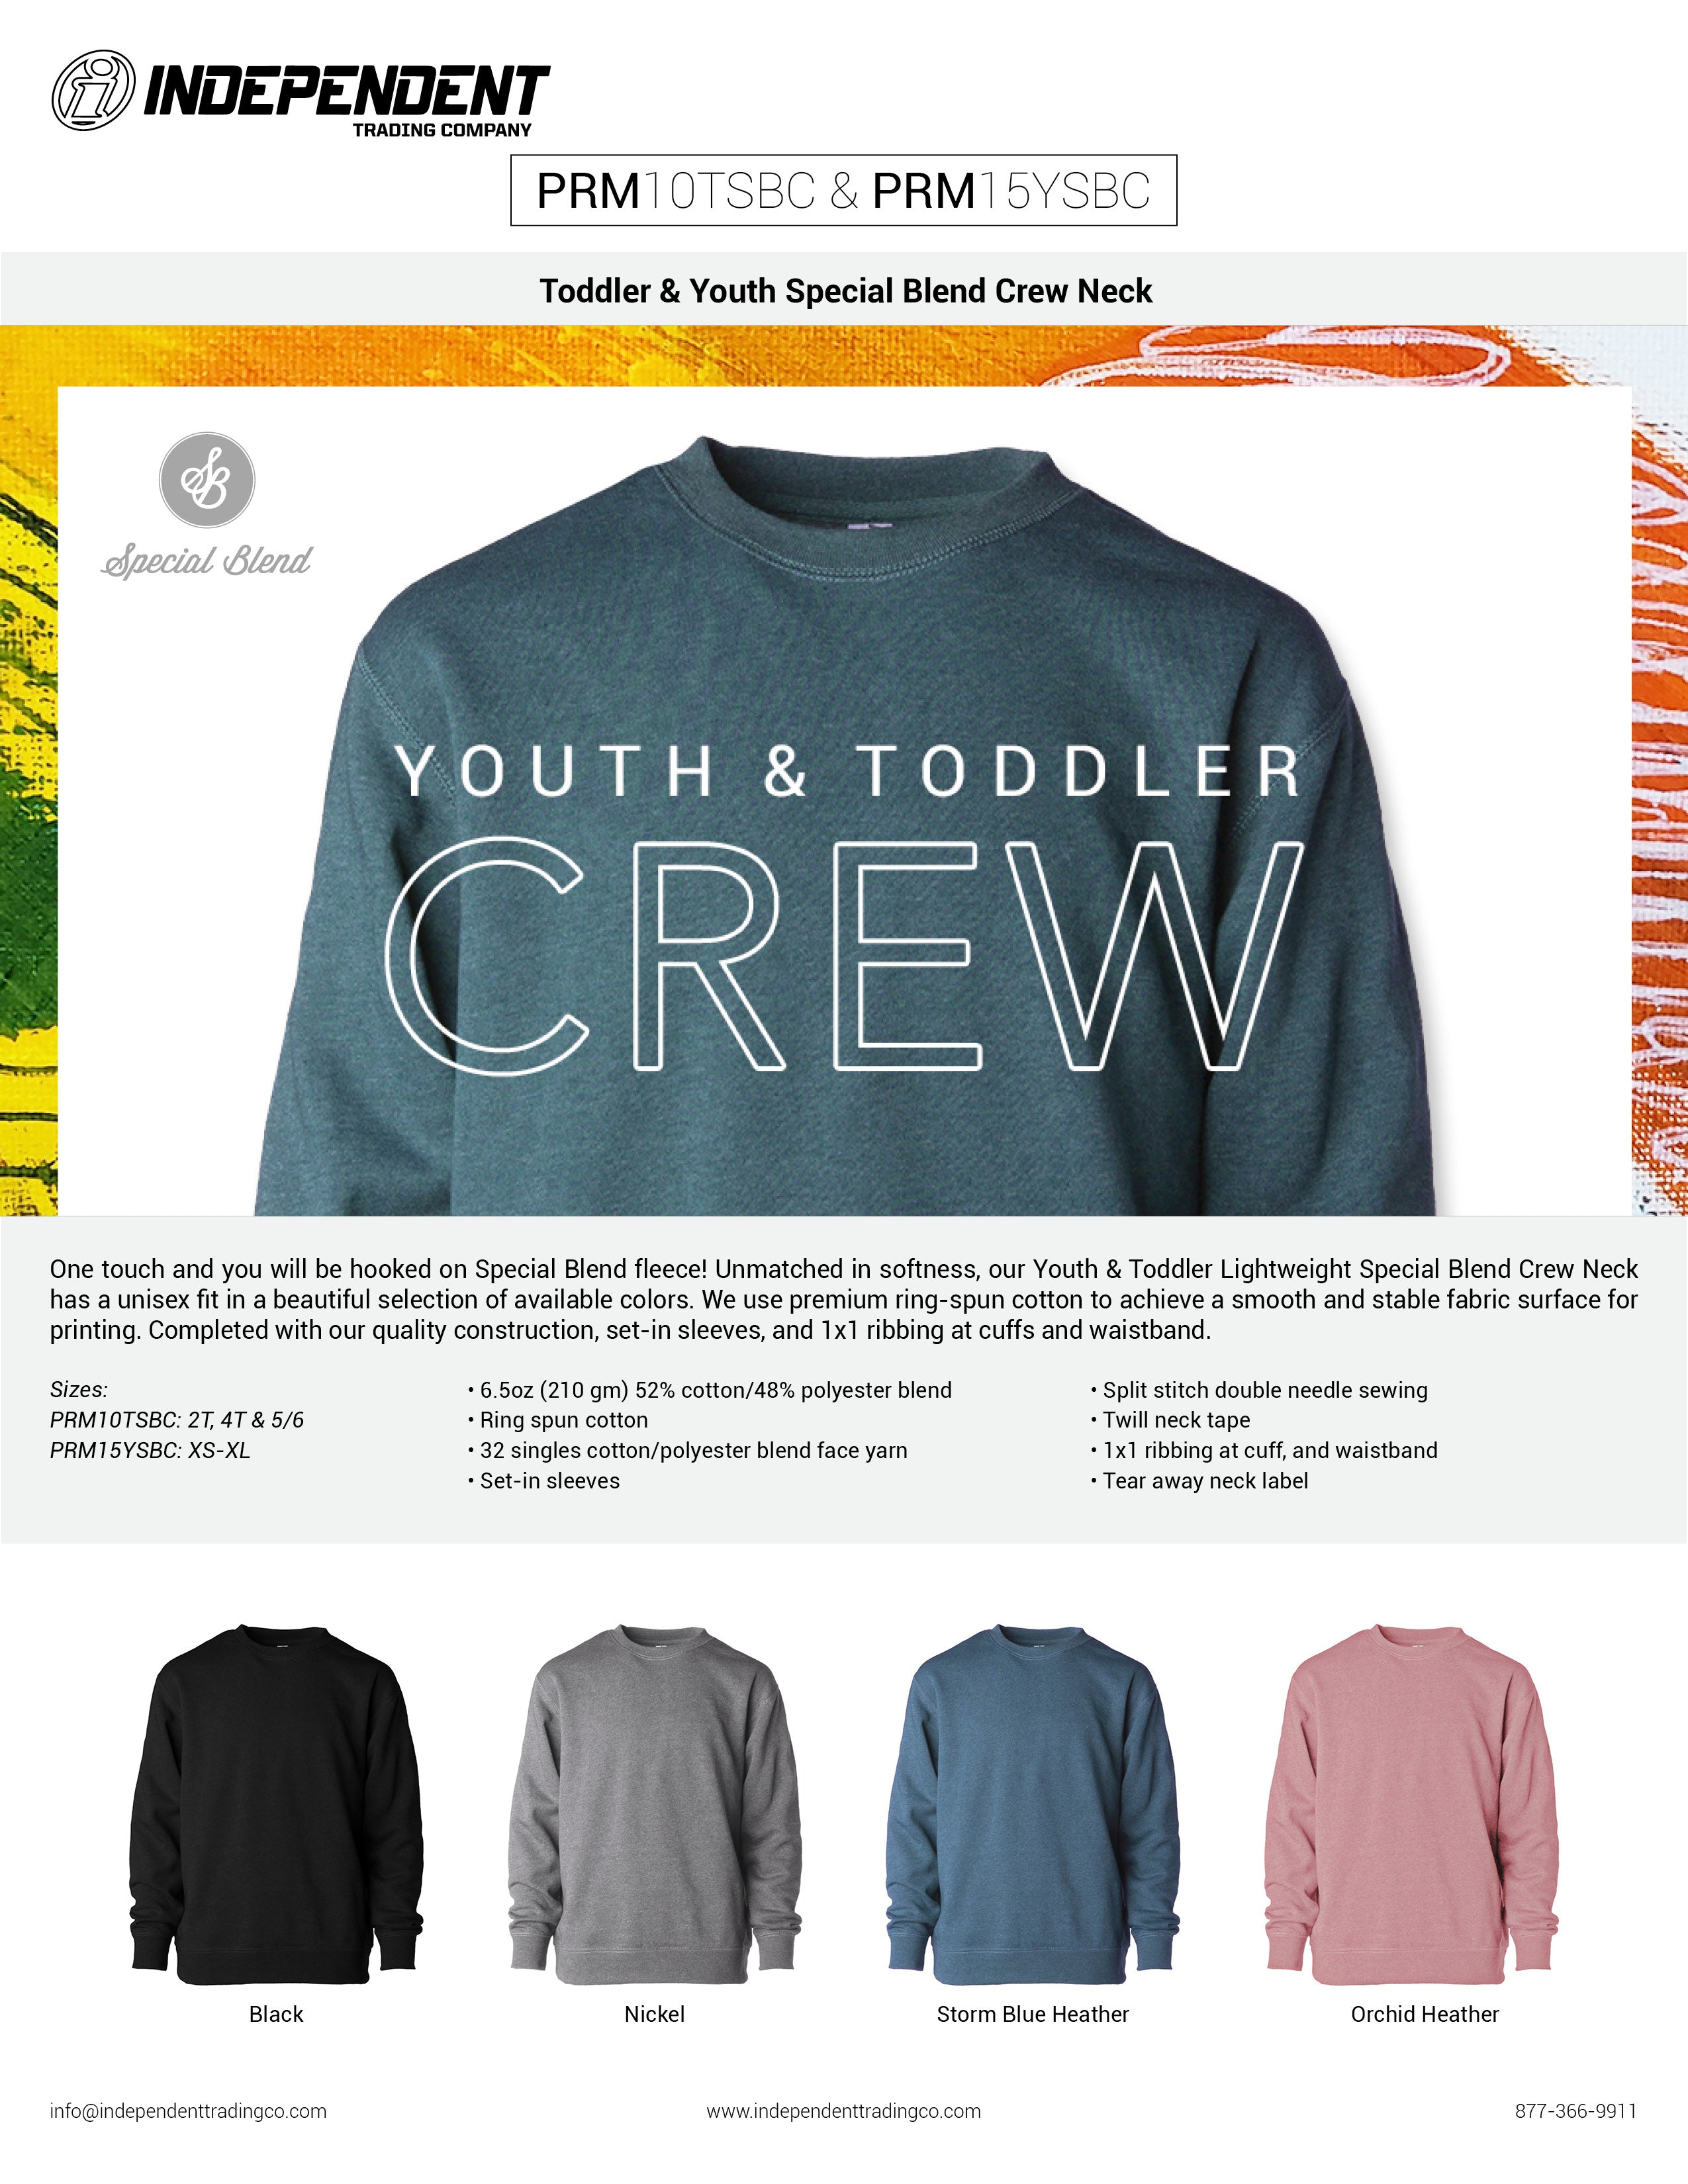 PRM10TSBC and PRM15YSBC toddler and youth lightweight special blend crew neck